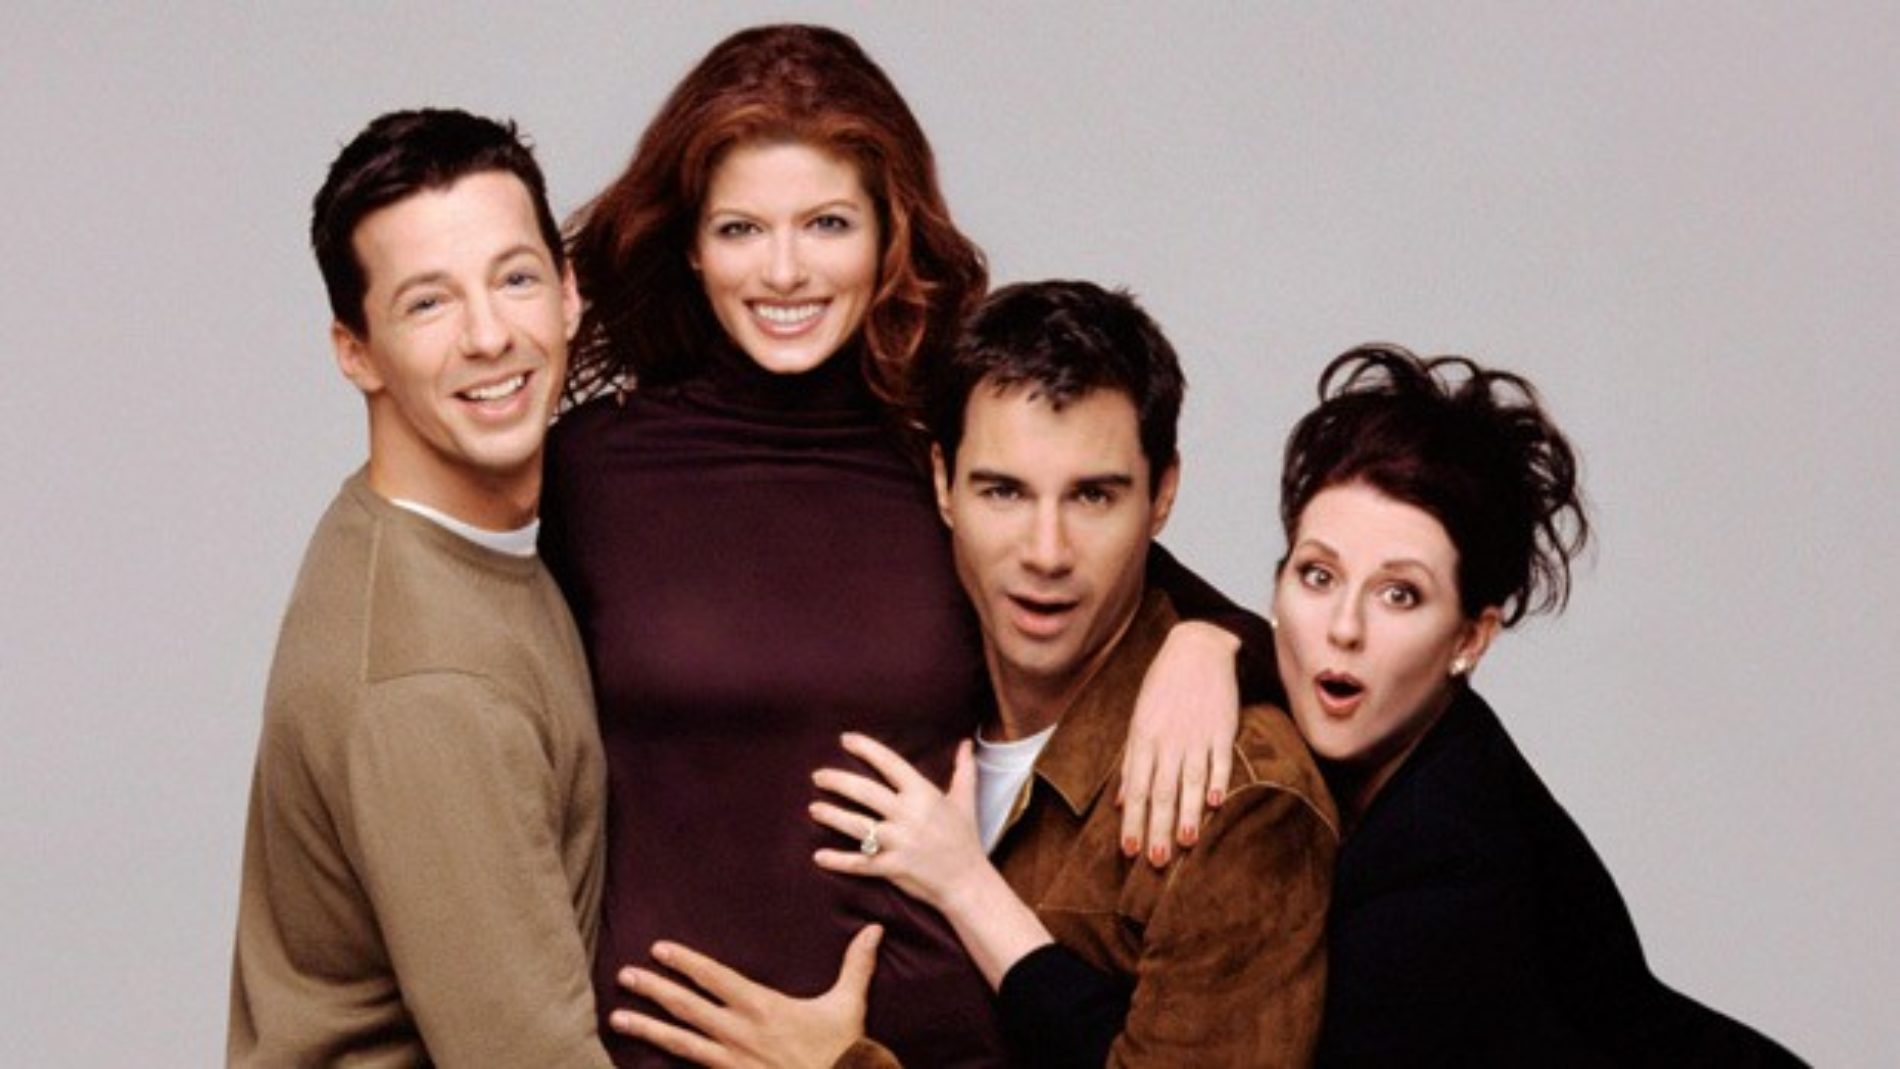 ‘Will & Grace’ definitely set to return as NBC orders 10 new episodes